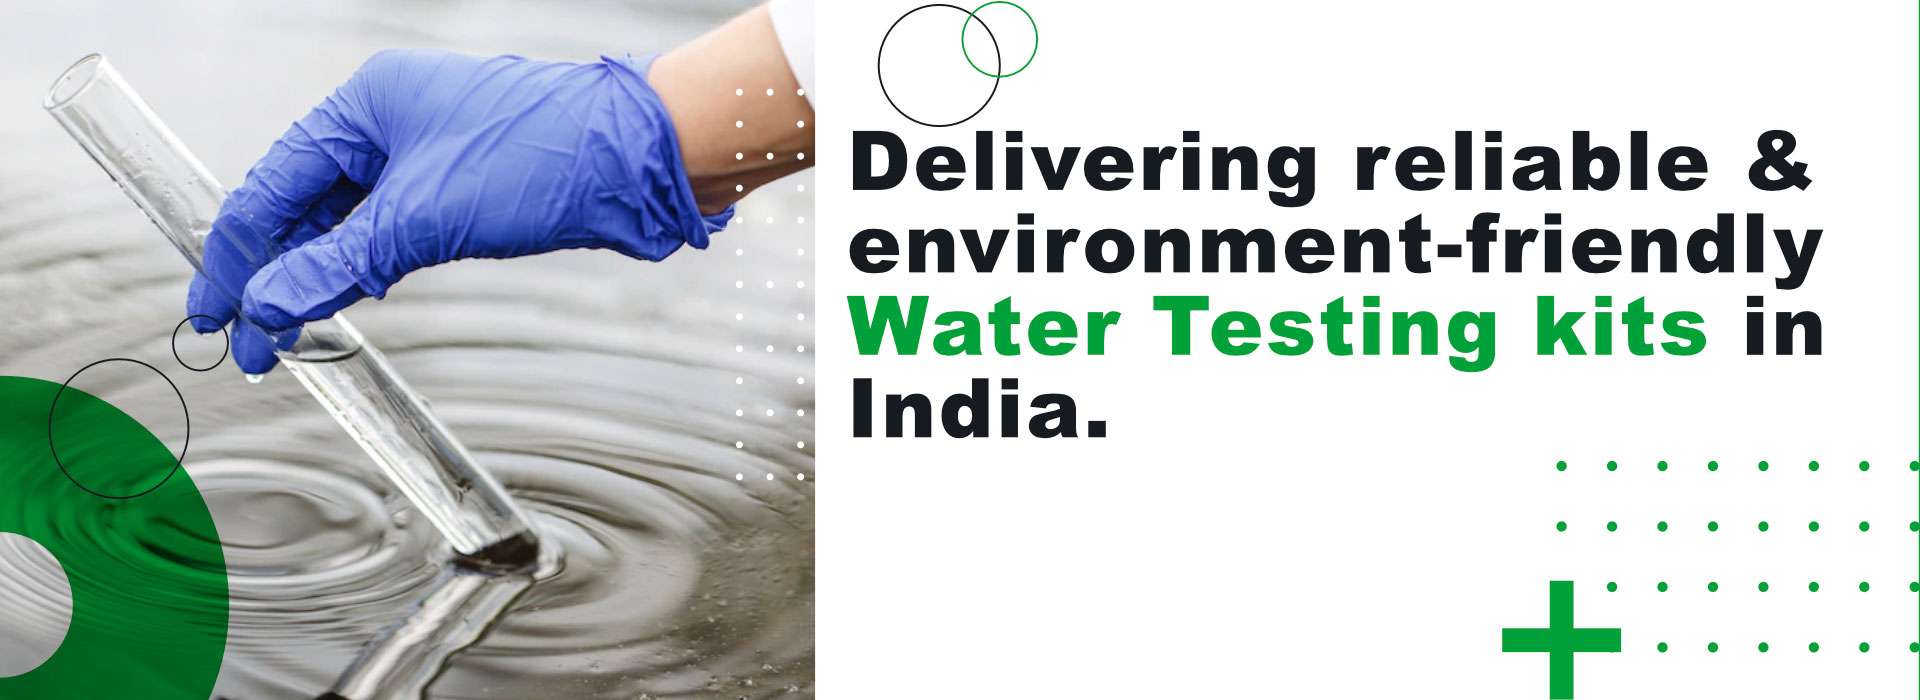  Delivering reliable & environment-friendly water Testing kits in India Manufacturers in Ludhiana